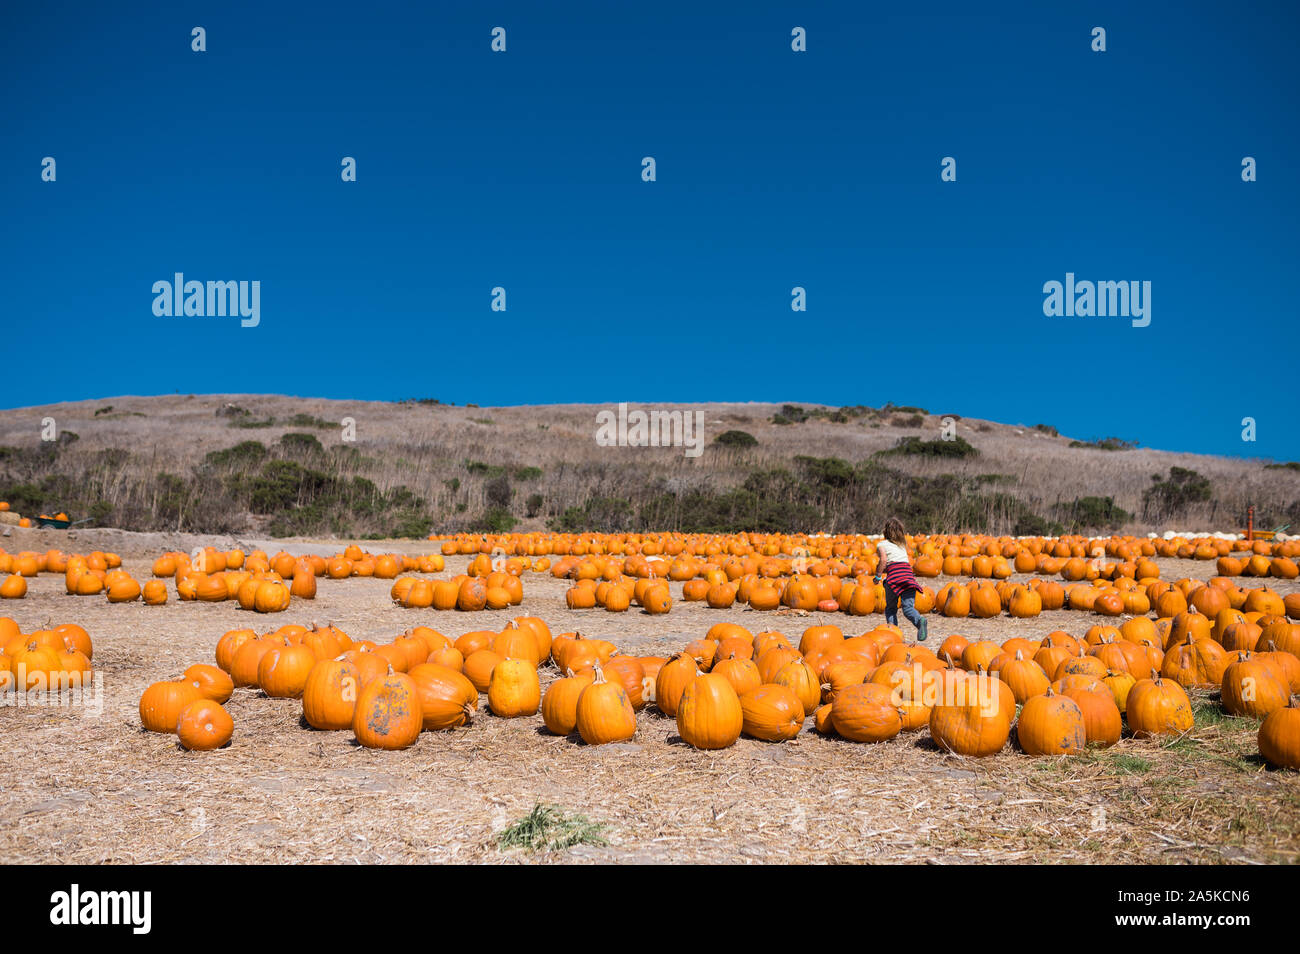 One child running through a pumpkin patch with a clear blue sky Stock Photo